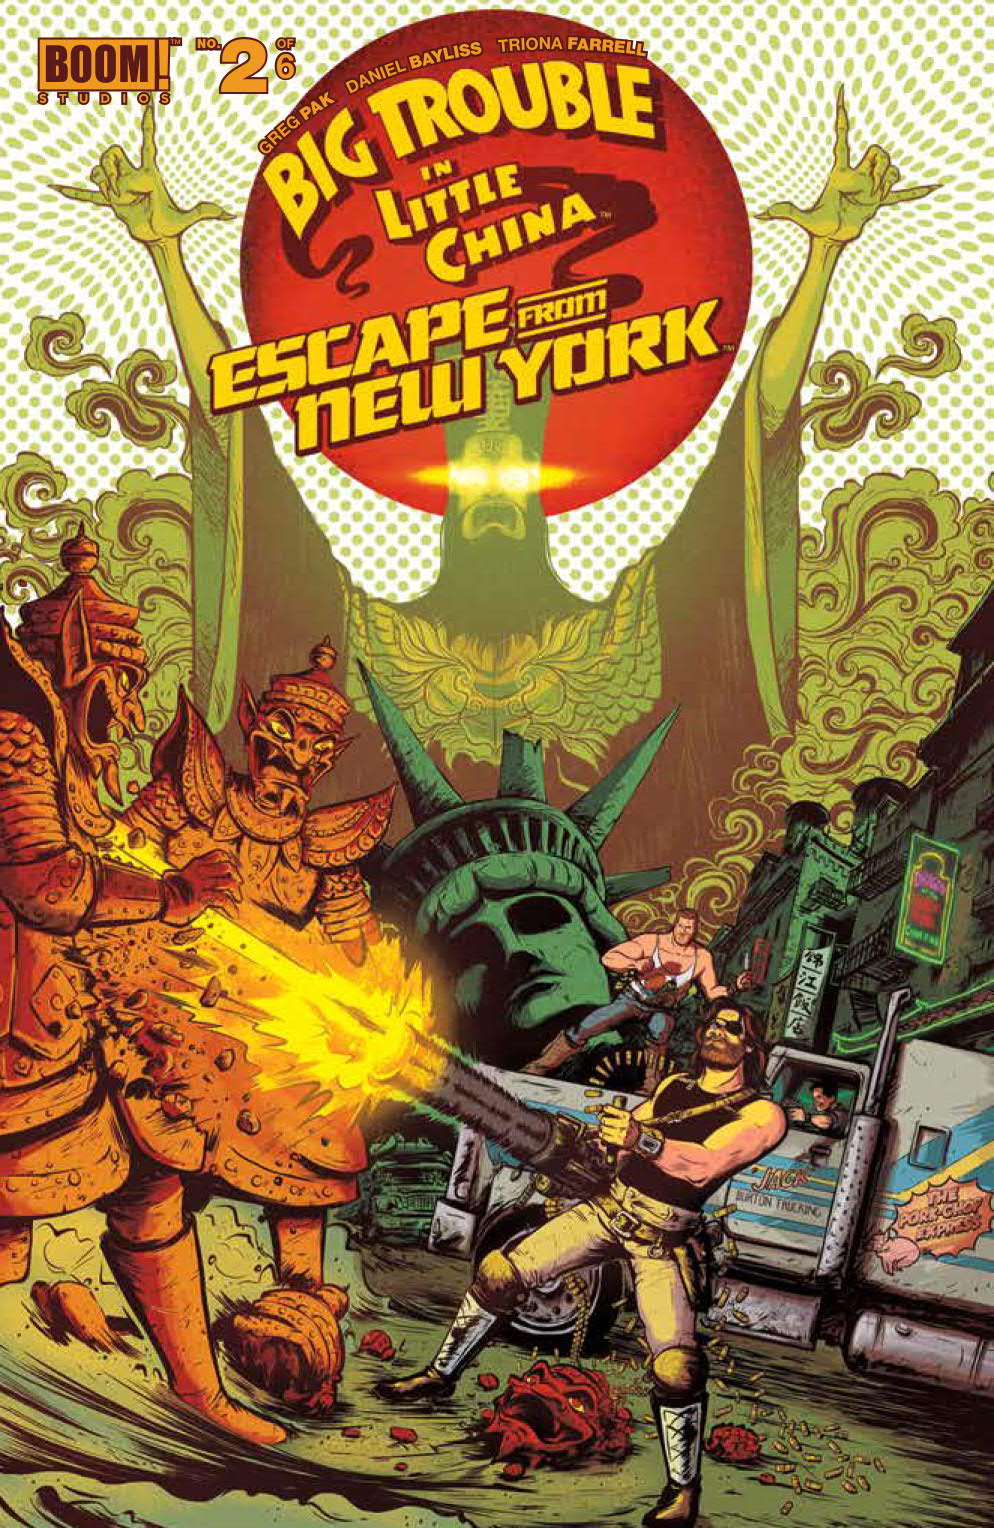 img - Review - Big Trouble in Little China / Escape From New York #2